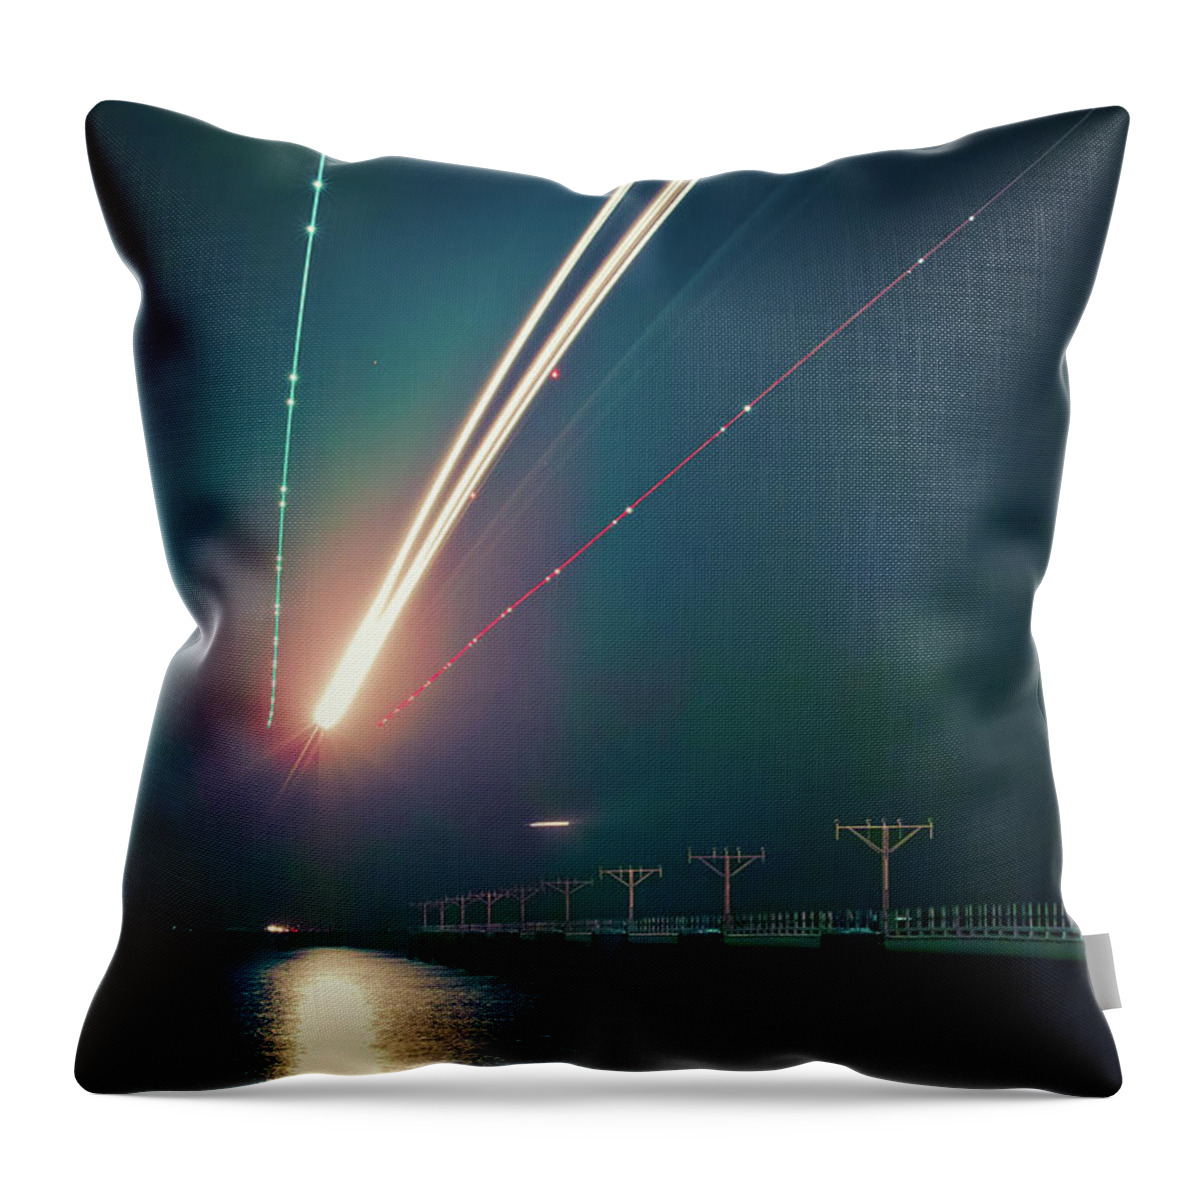 Outdoors Throw Pillow featuring the photograph Light Trails Of Landing Aircraft At by D3sign